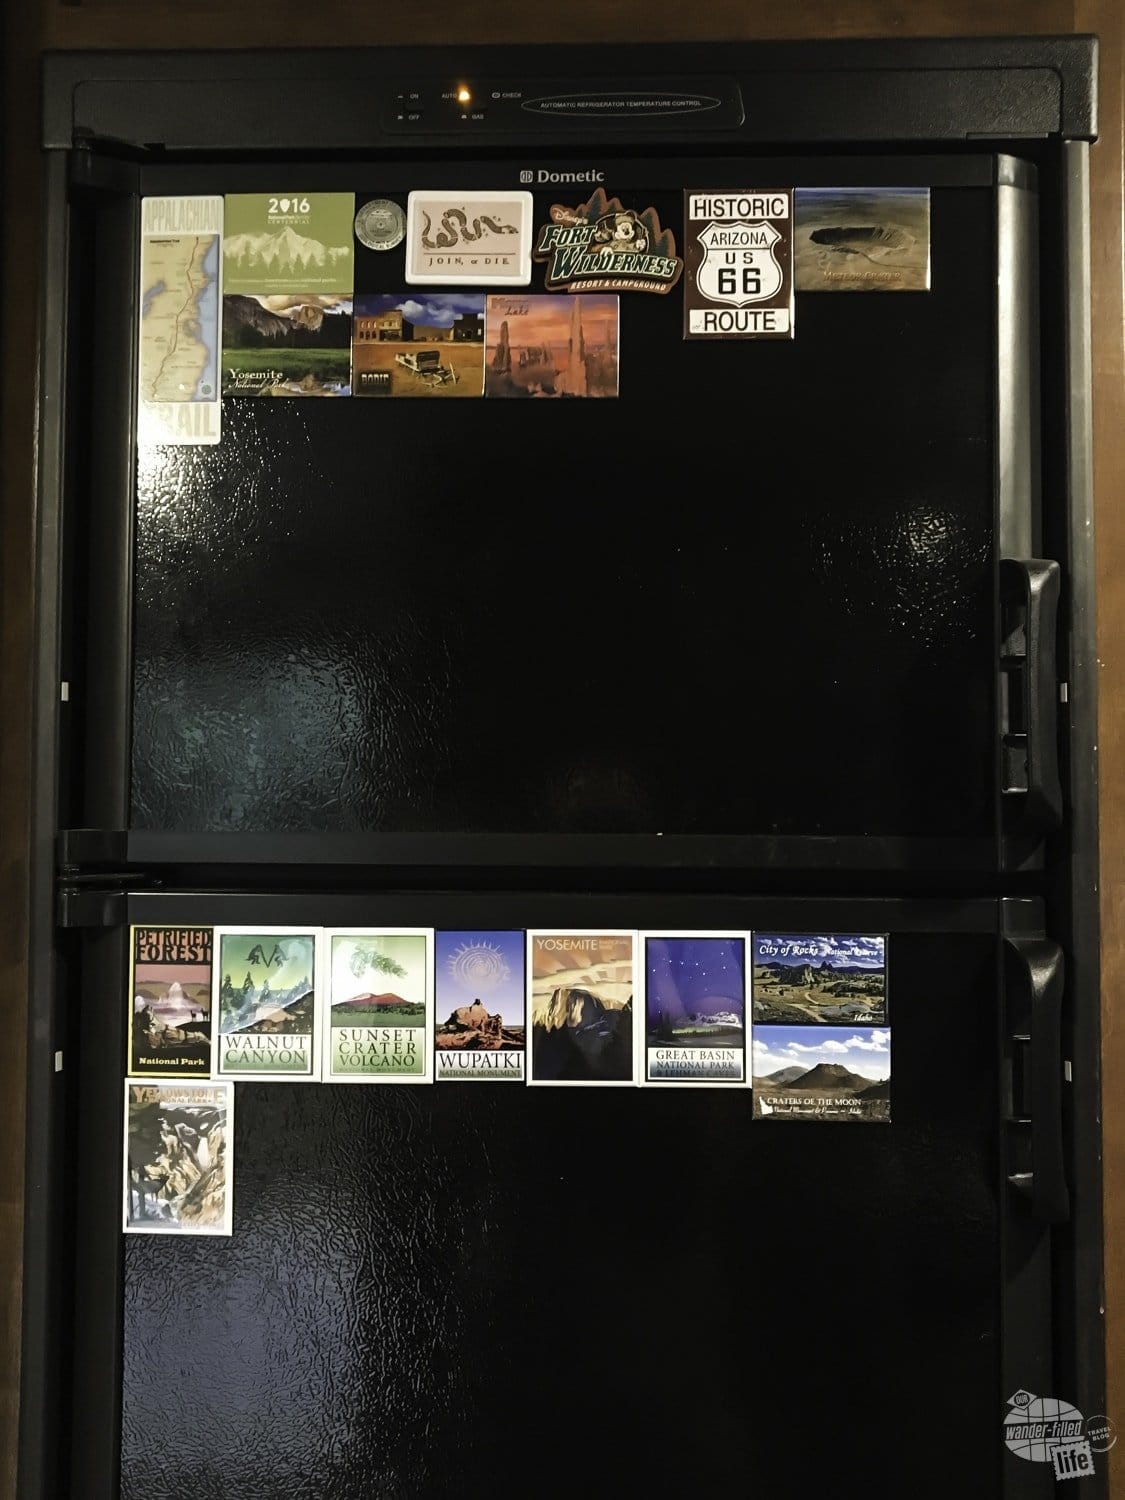 Souvenir magnets from Yellowstone and other stops on our vacation.